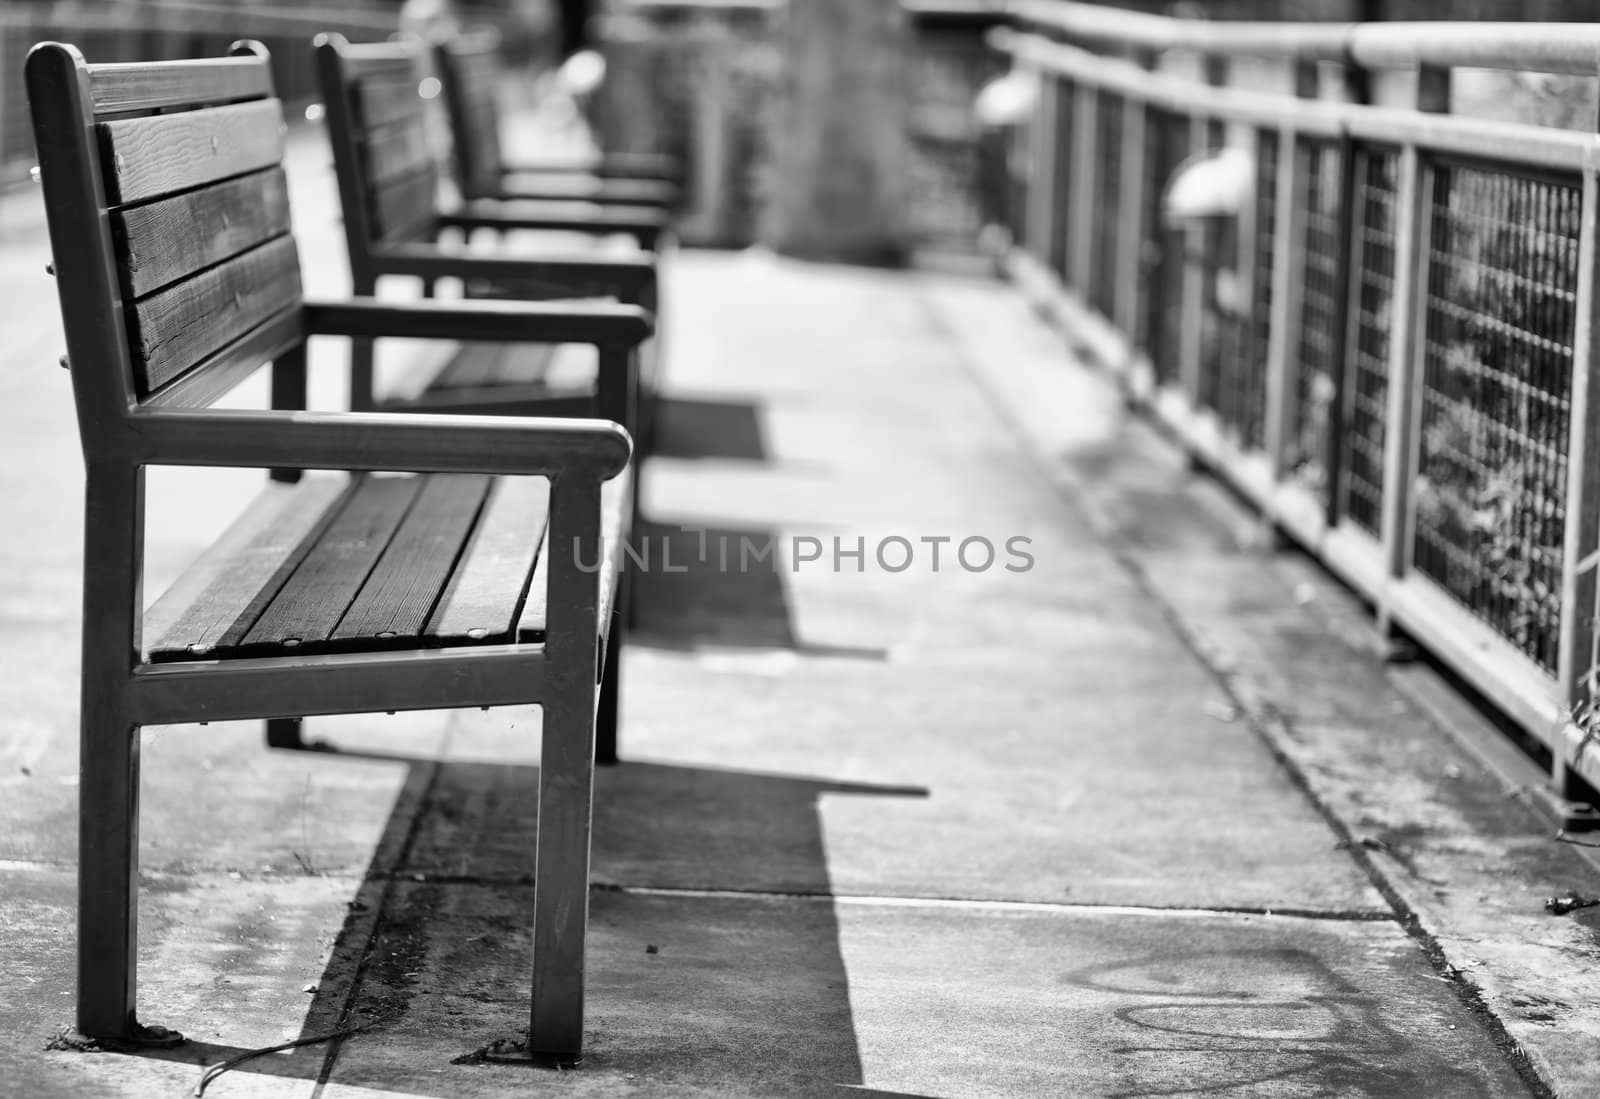 Green wood and metal Benches with closest in shallow focus trailing to softer background